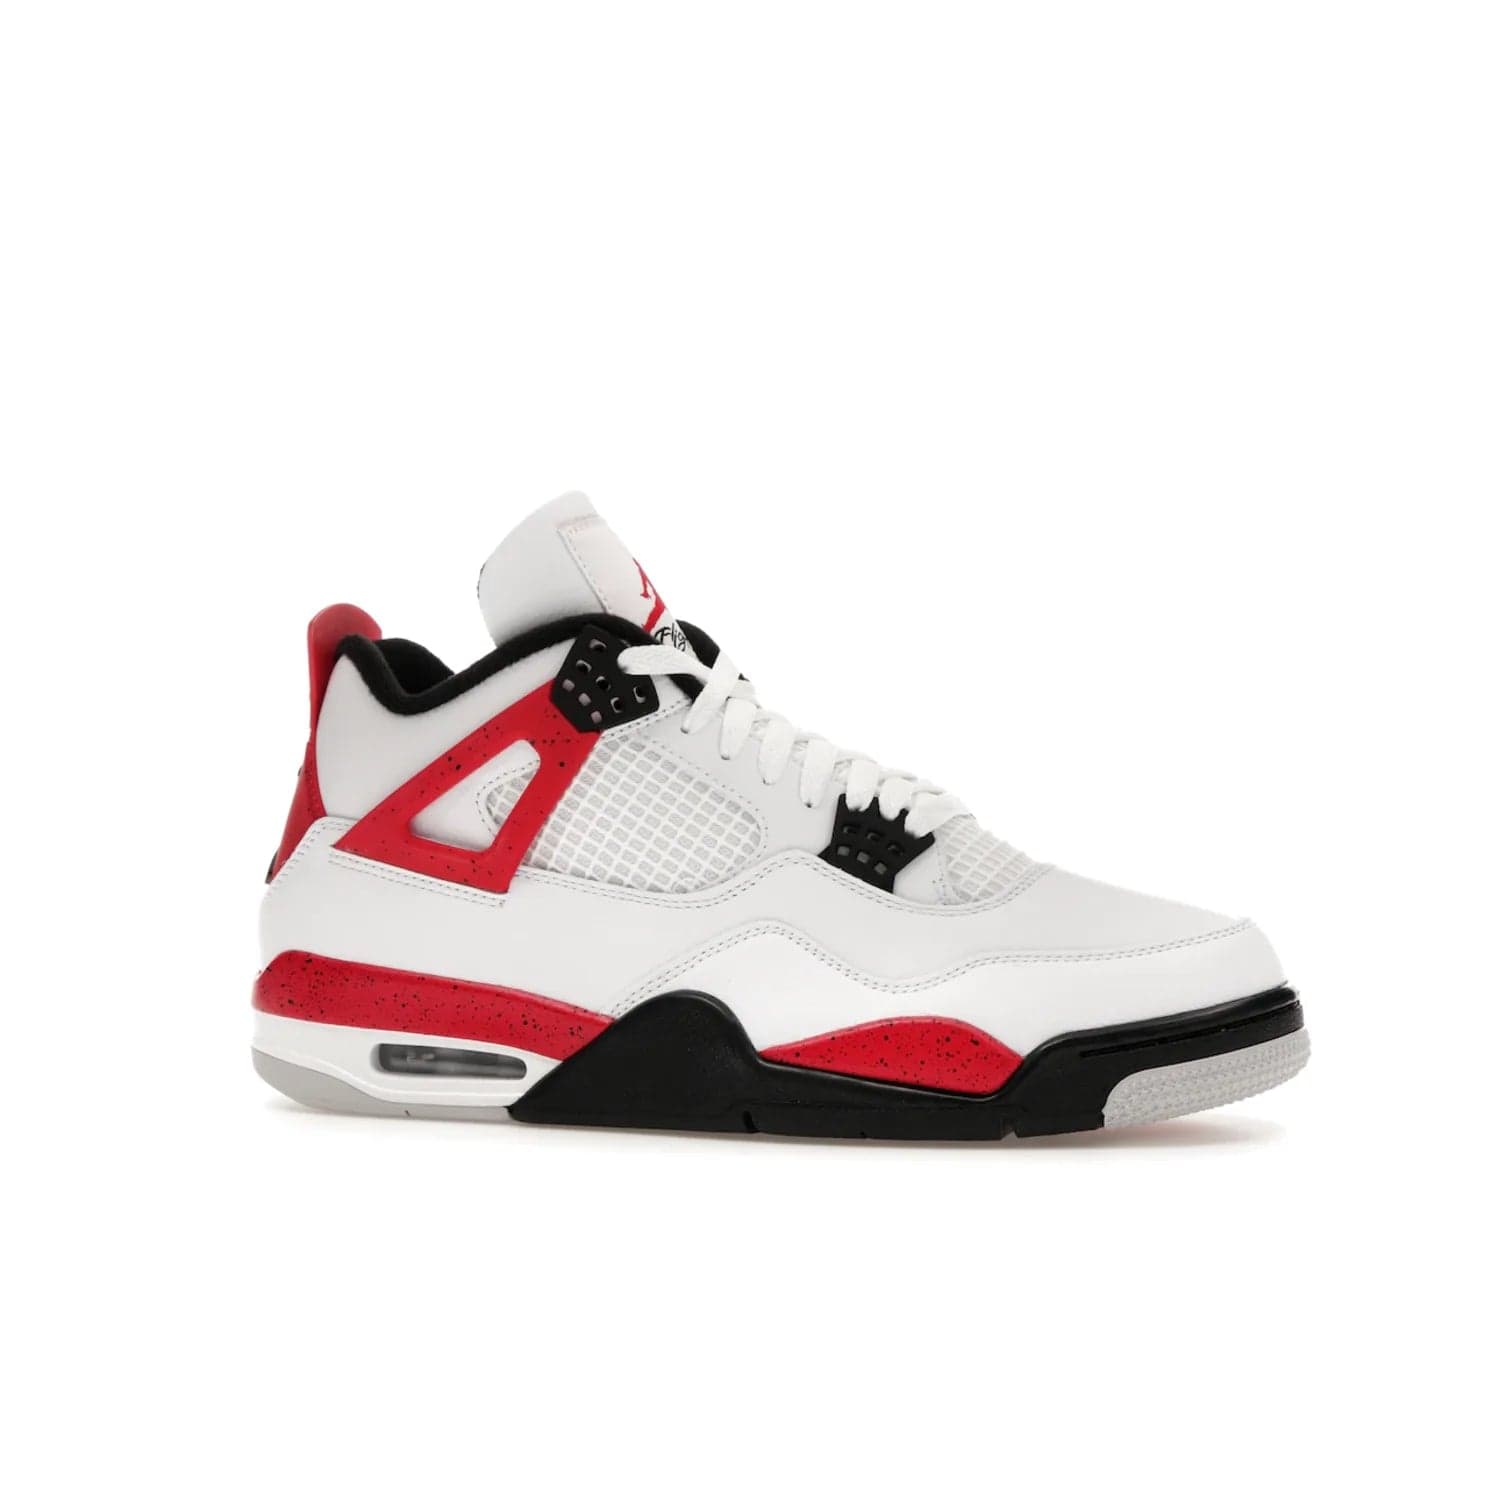 Jordan 4 Retro Red Cement - Image 3 - Only at www.BallersClubKickz.com - Iconic Jordan silhouette with a unique twist. White premium leather uppers with fire red and black detailing. Black, white, and fire red midsole with mesh detailing and Jumpman logo. Jordan 4 Retro Red Cement released with premium price.